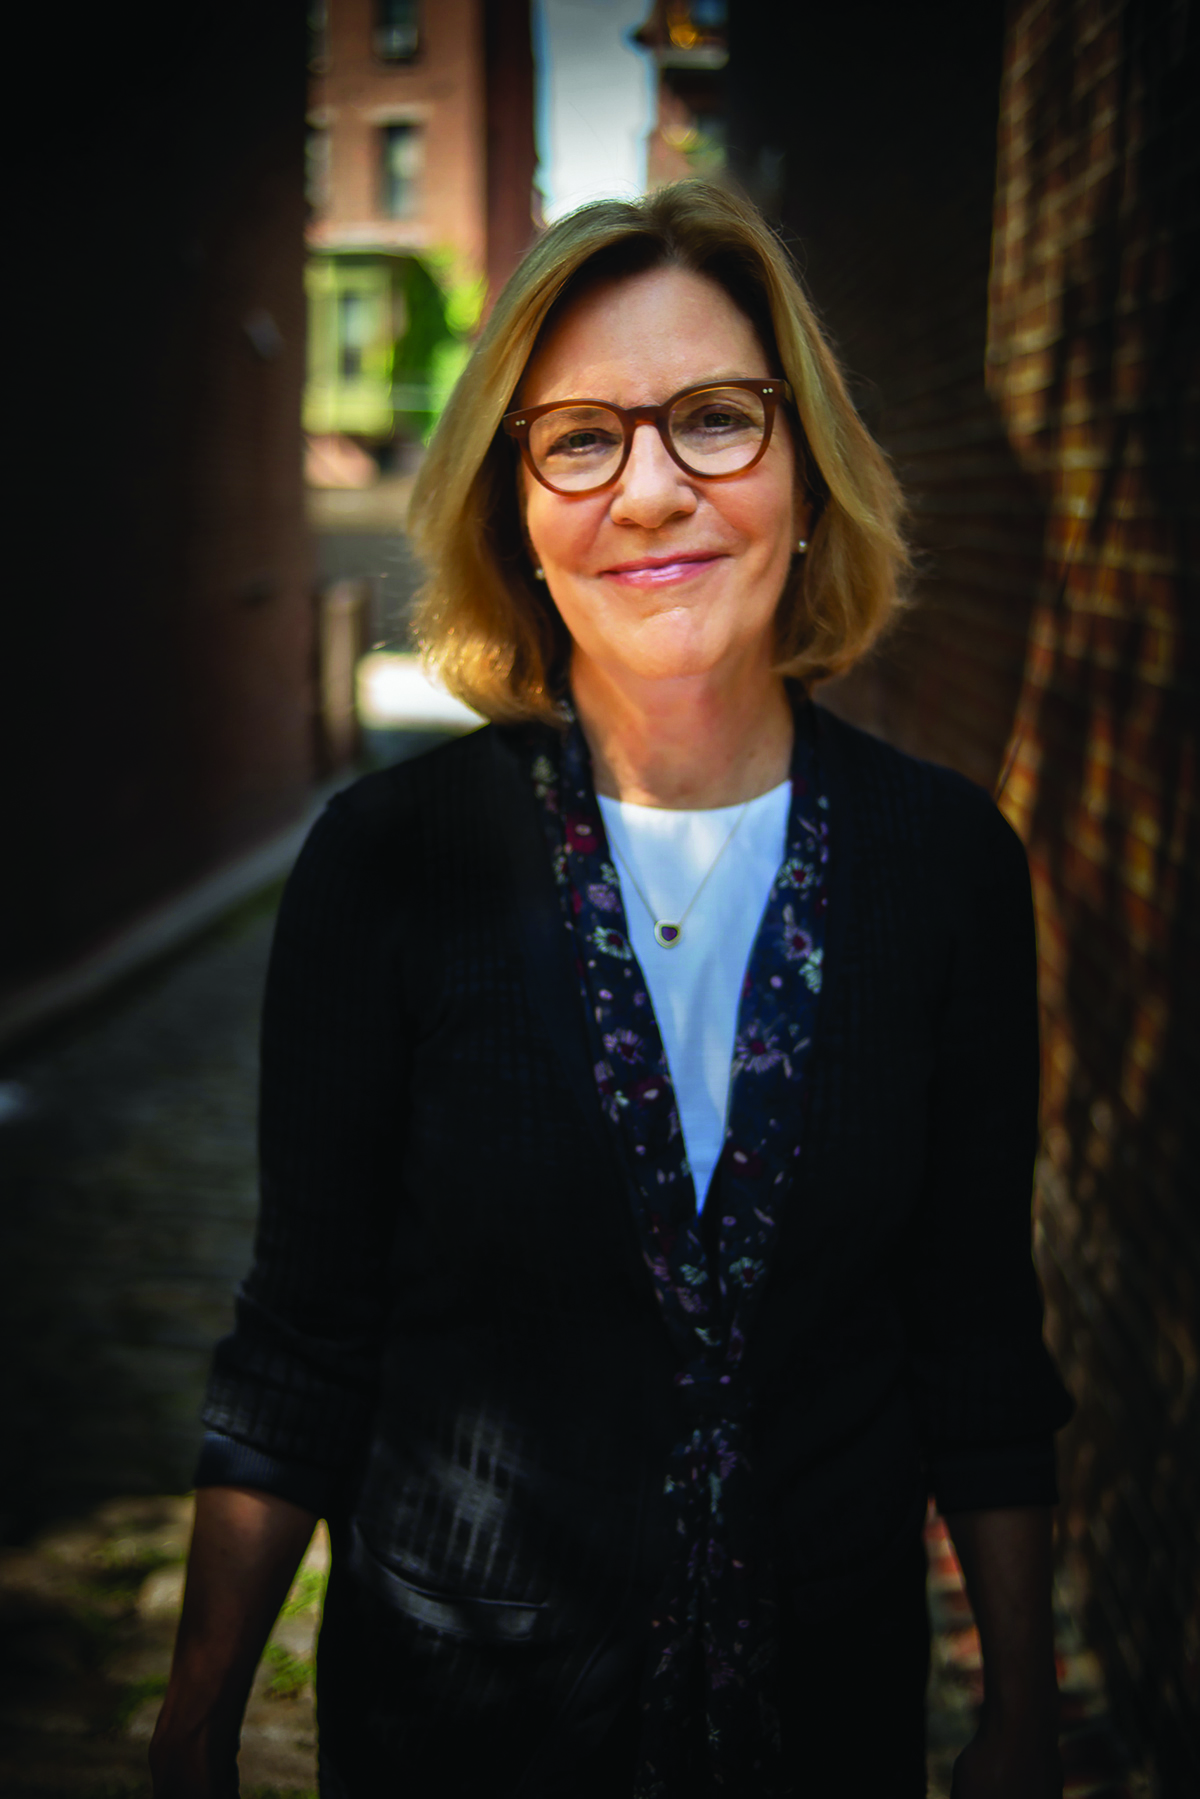 ONS member Anne H. Gross, PhD, RN, NEA-BC, FAAN, is the senior vice president of patient care services and chief nursing office at Dana-Farber Cancer Institute in Boston, MA.